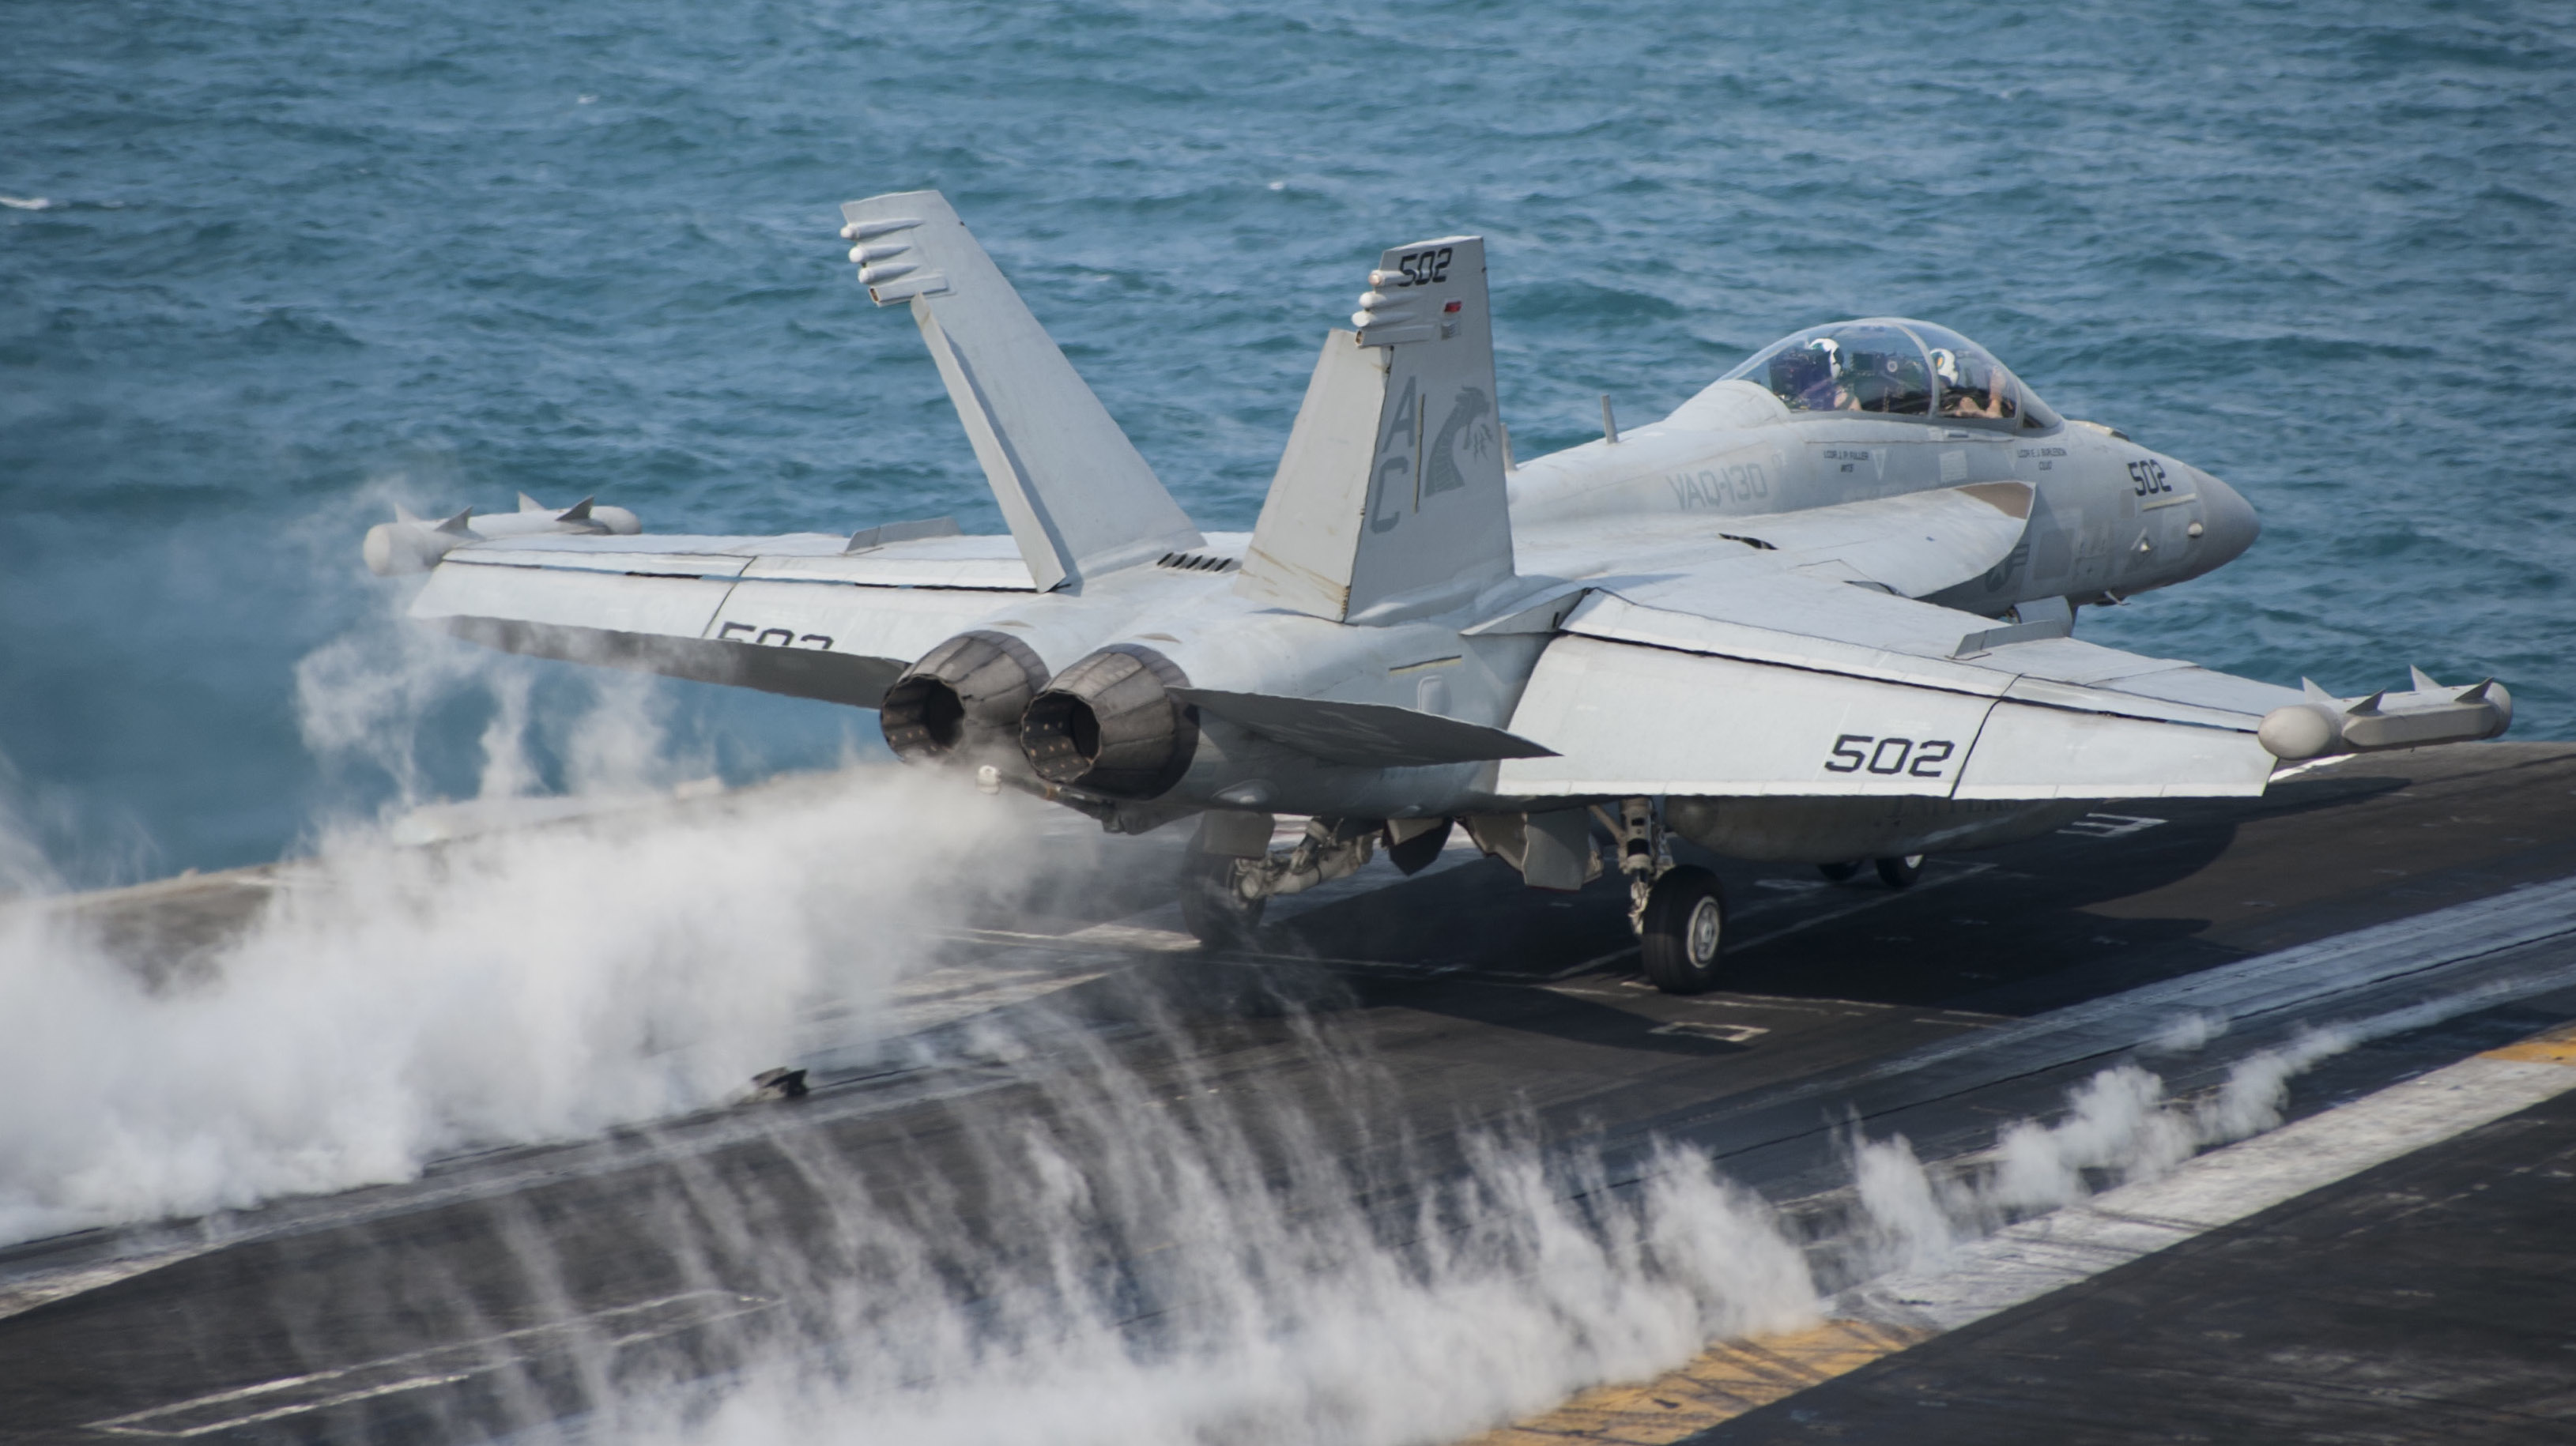 An EA-18G Growler, assigned to the “Zappers” of Electronic Attack Squadron 130, launches from the flight deck of the aircraft carrier USS Harry S. Truman (CVN-75) on Jan 13, 2014. US Navy Photo